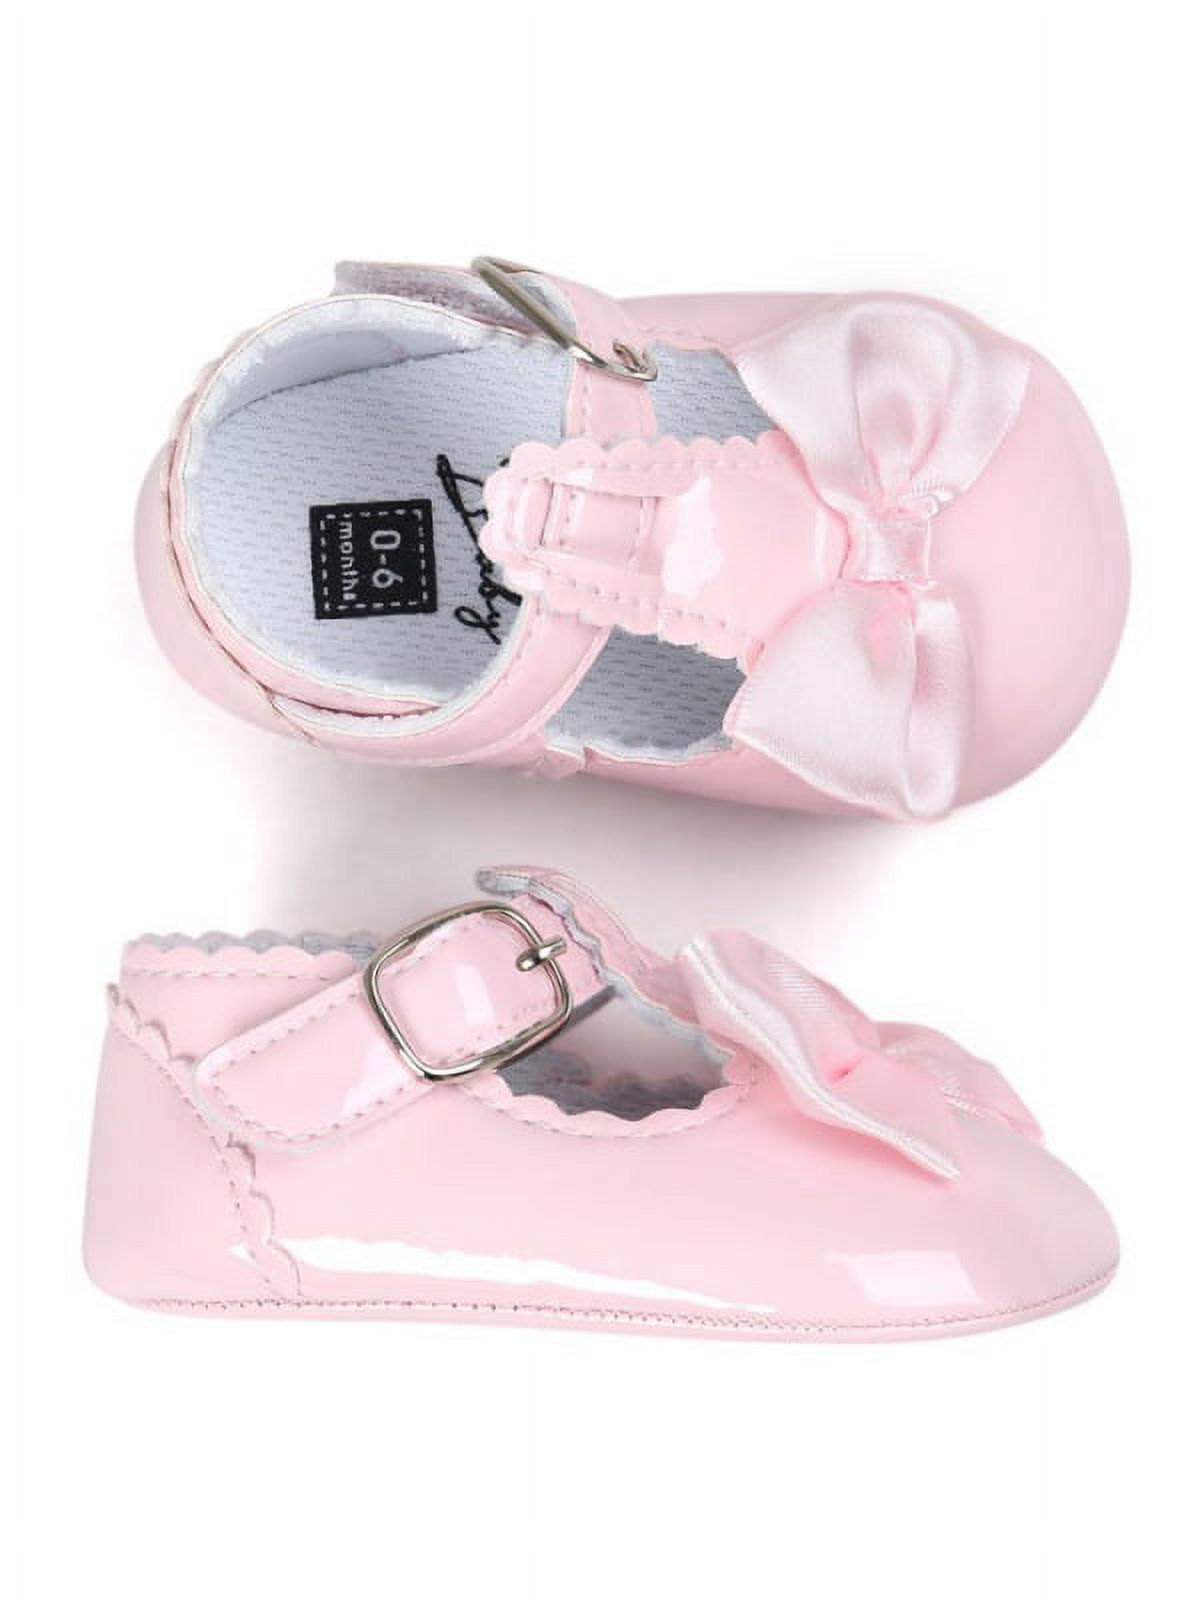 Lavaport Newborn Baby Girls Bowknot Shoes PU Leather Buckle First Walkers - image 4 of 5